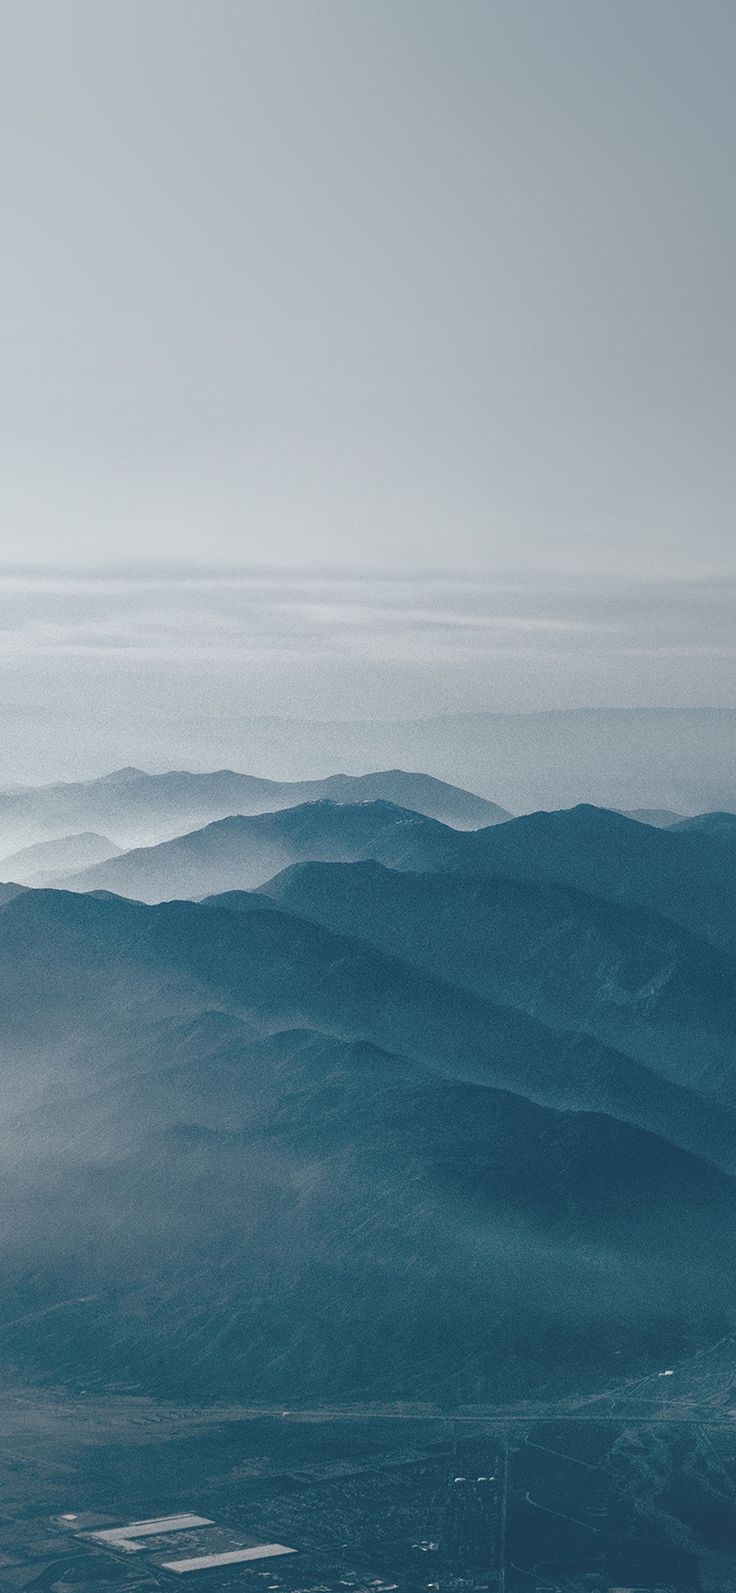 iPhone X wallpaper, mountain fog nature white blue sky view